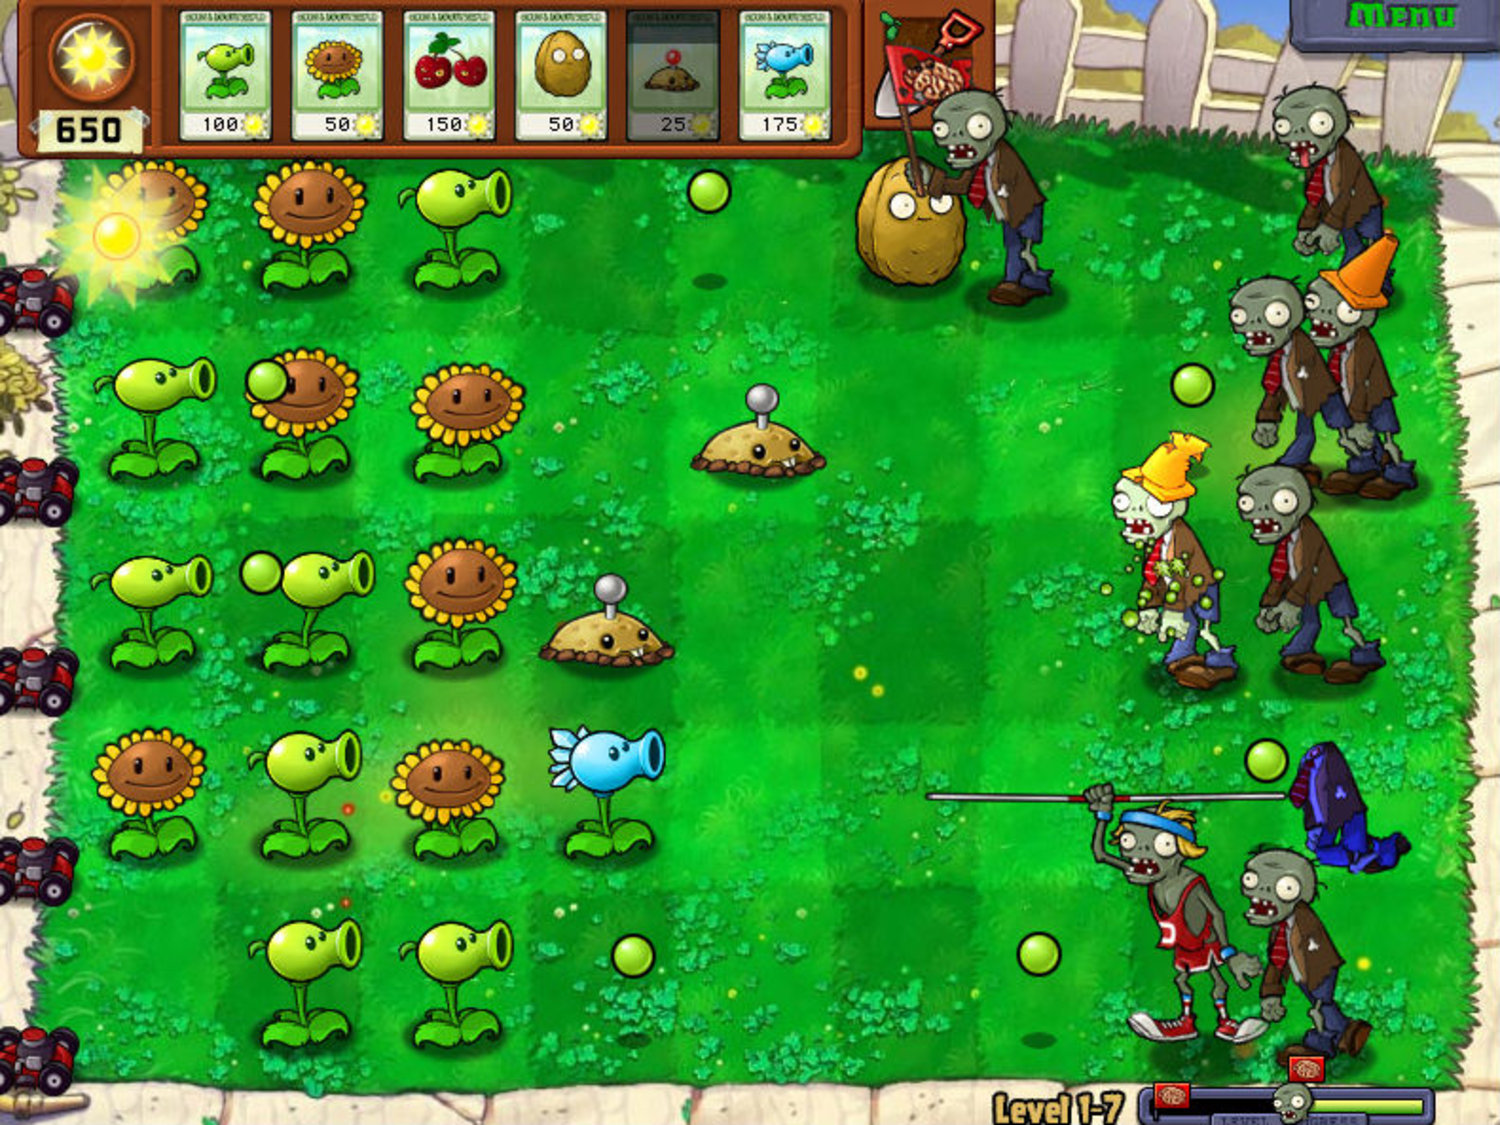 Plants vs Zombies – review, Games